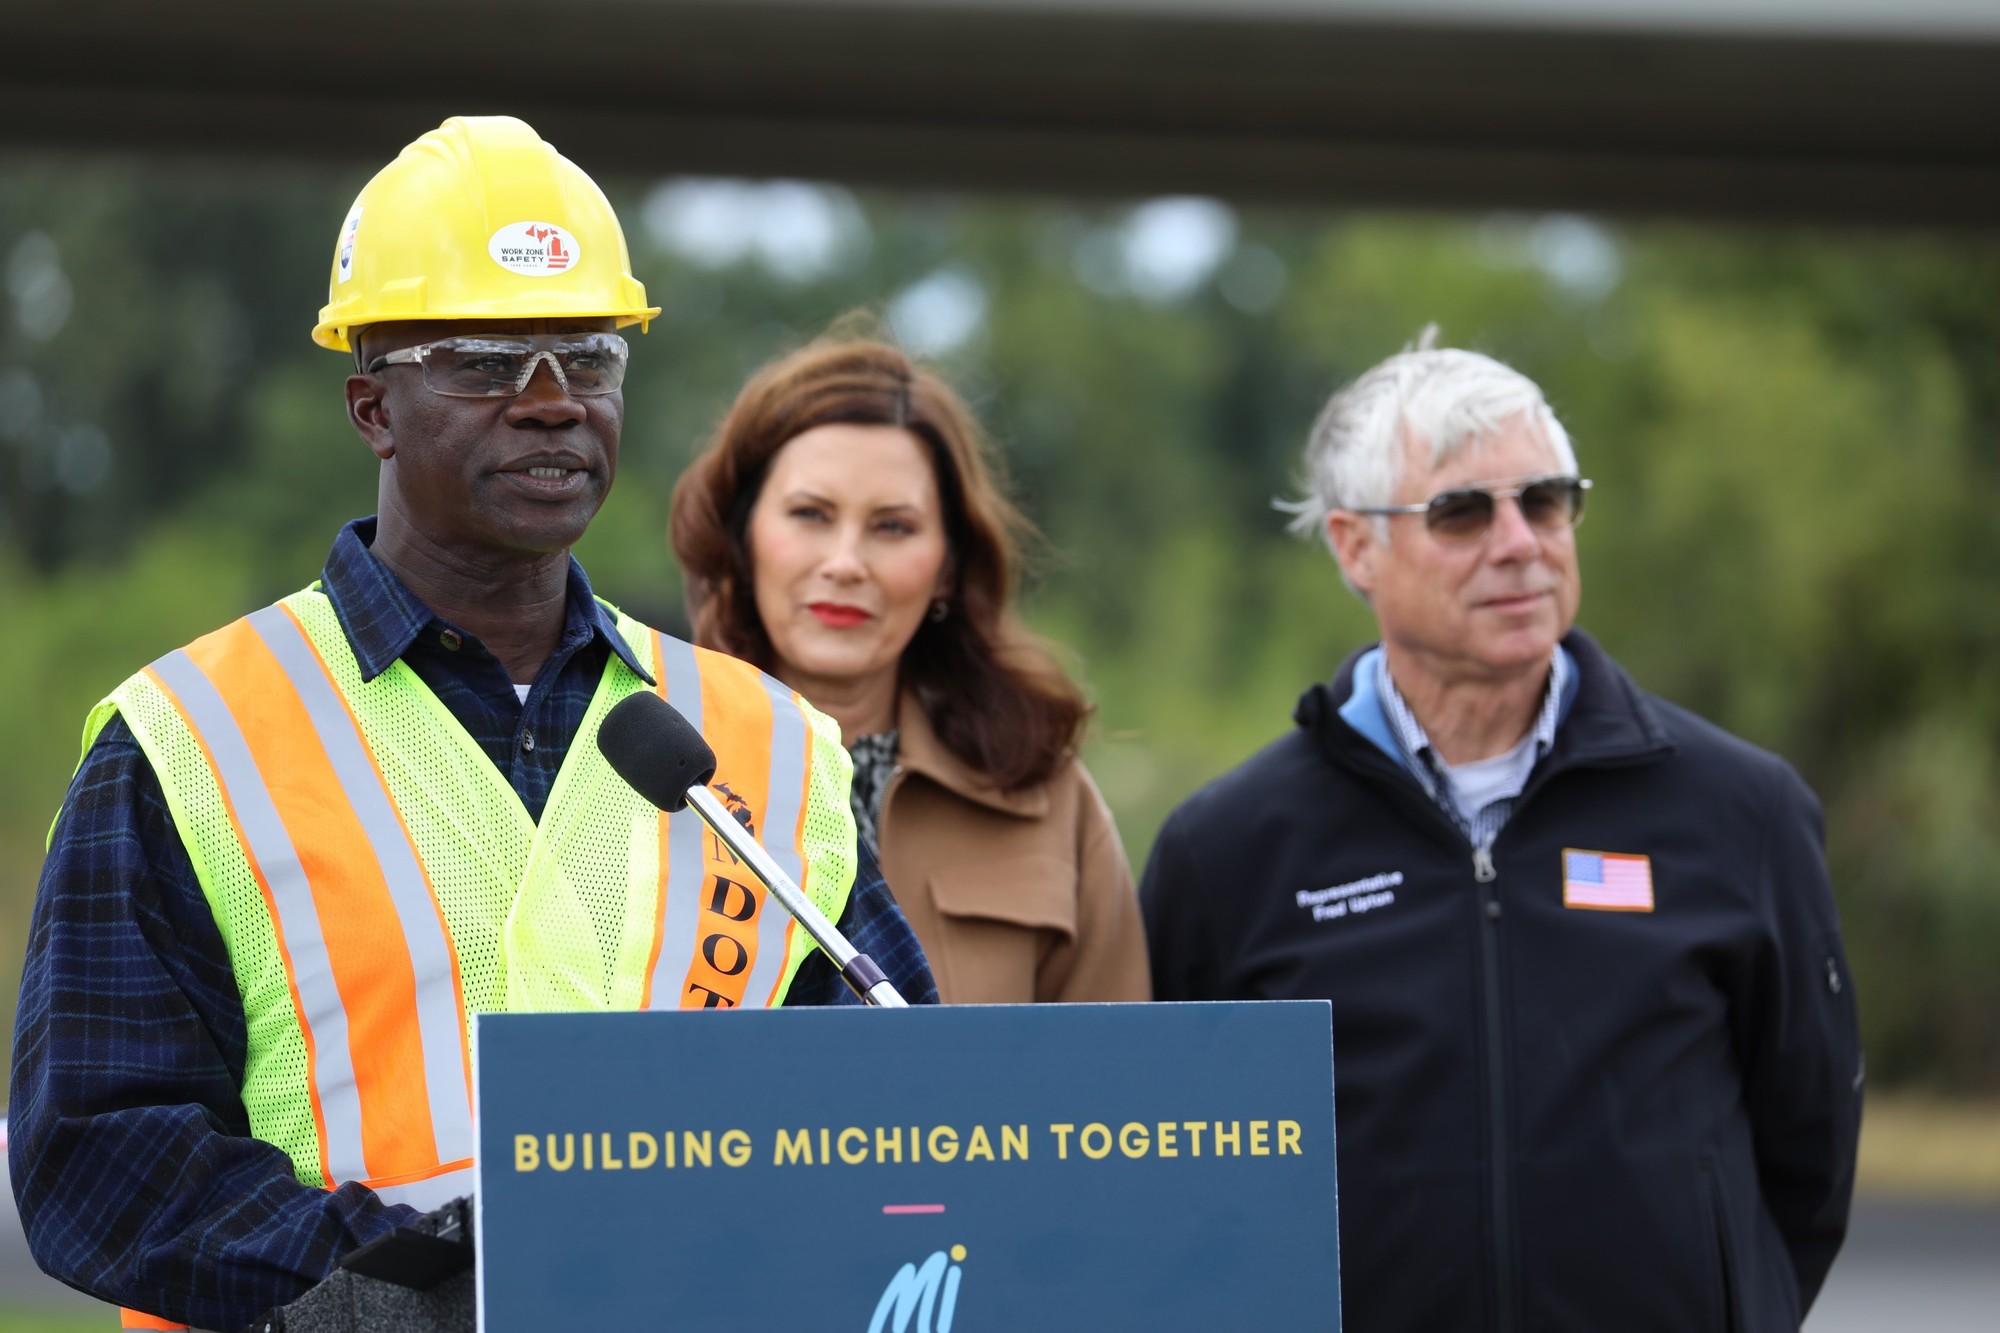 MDOT Director Paul C. Ajegba speaks at event